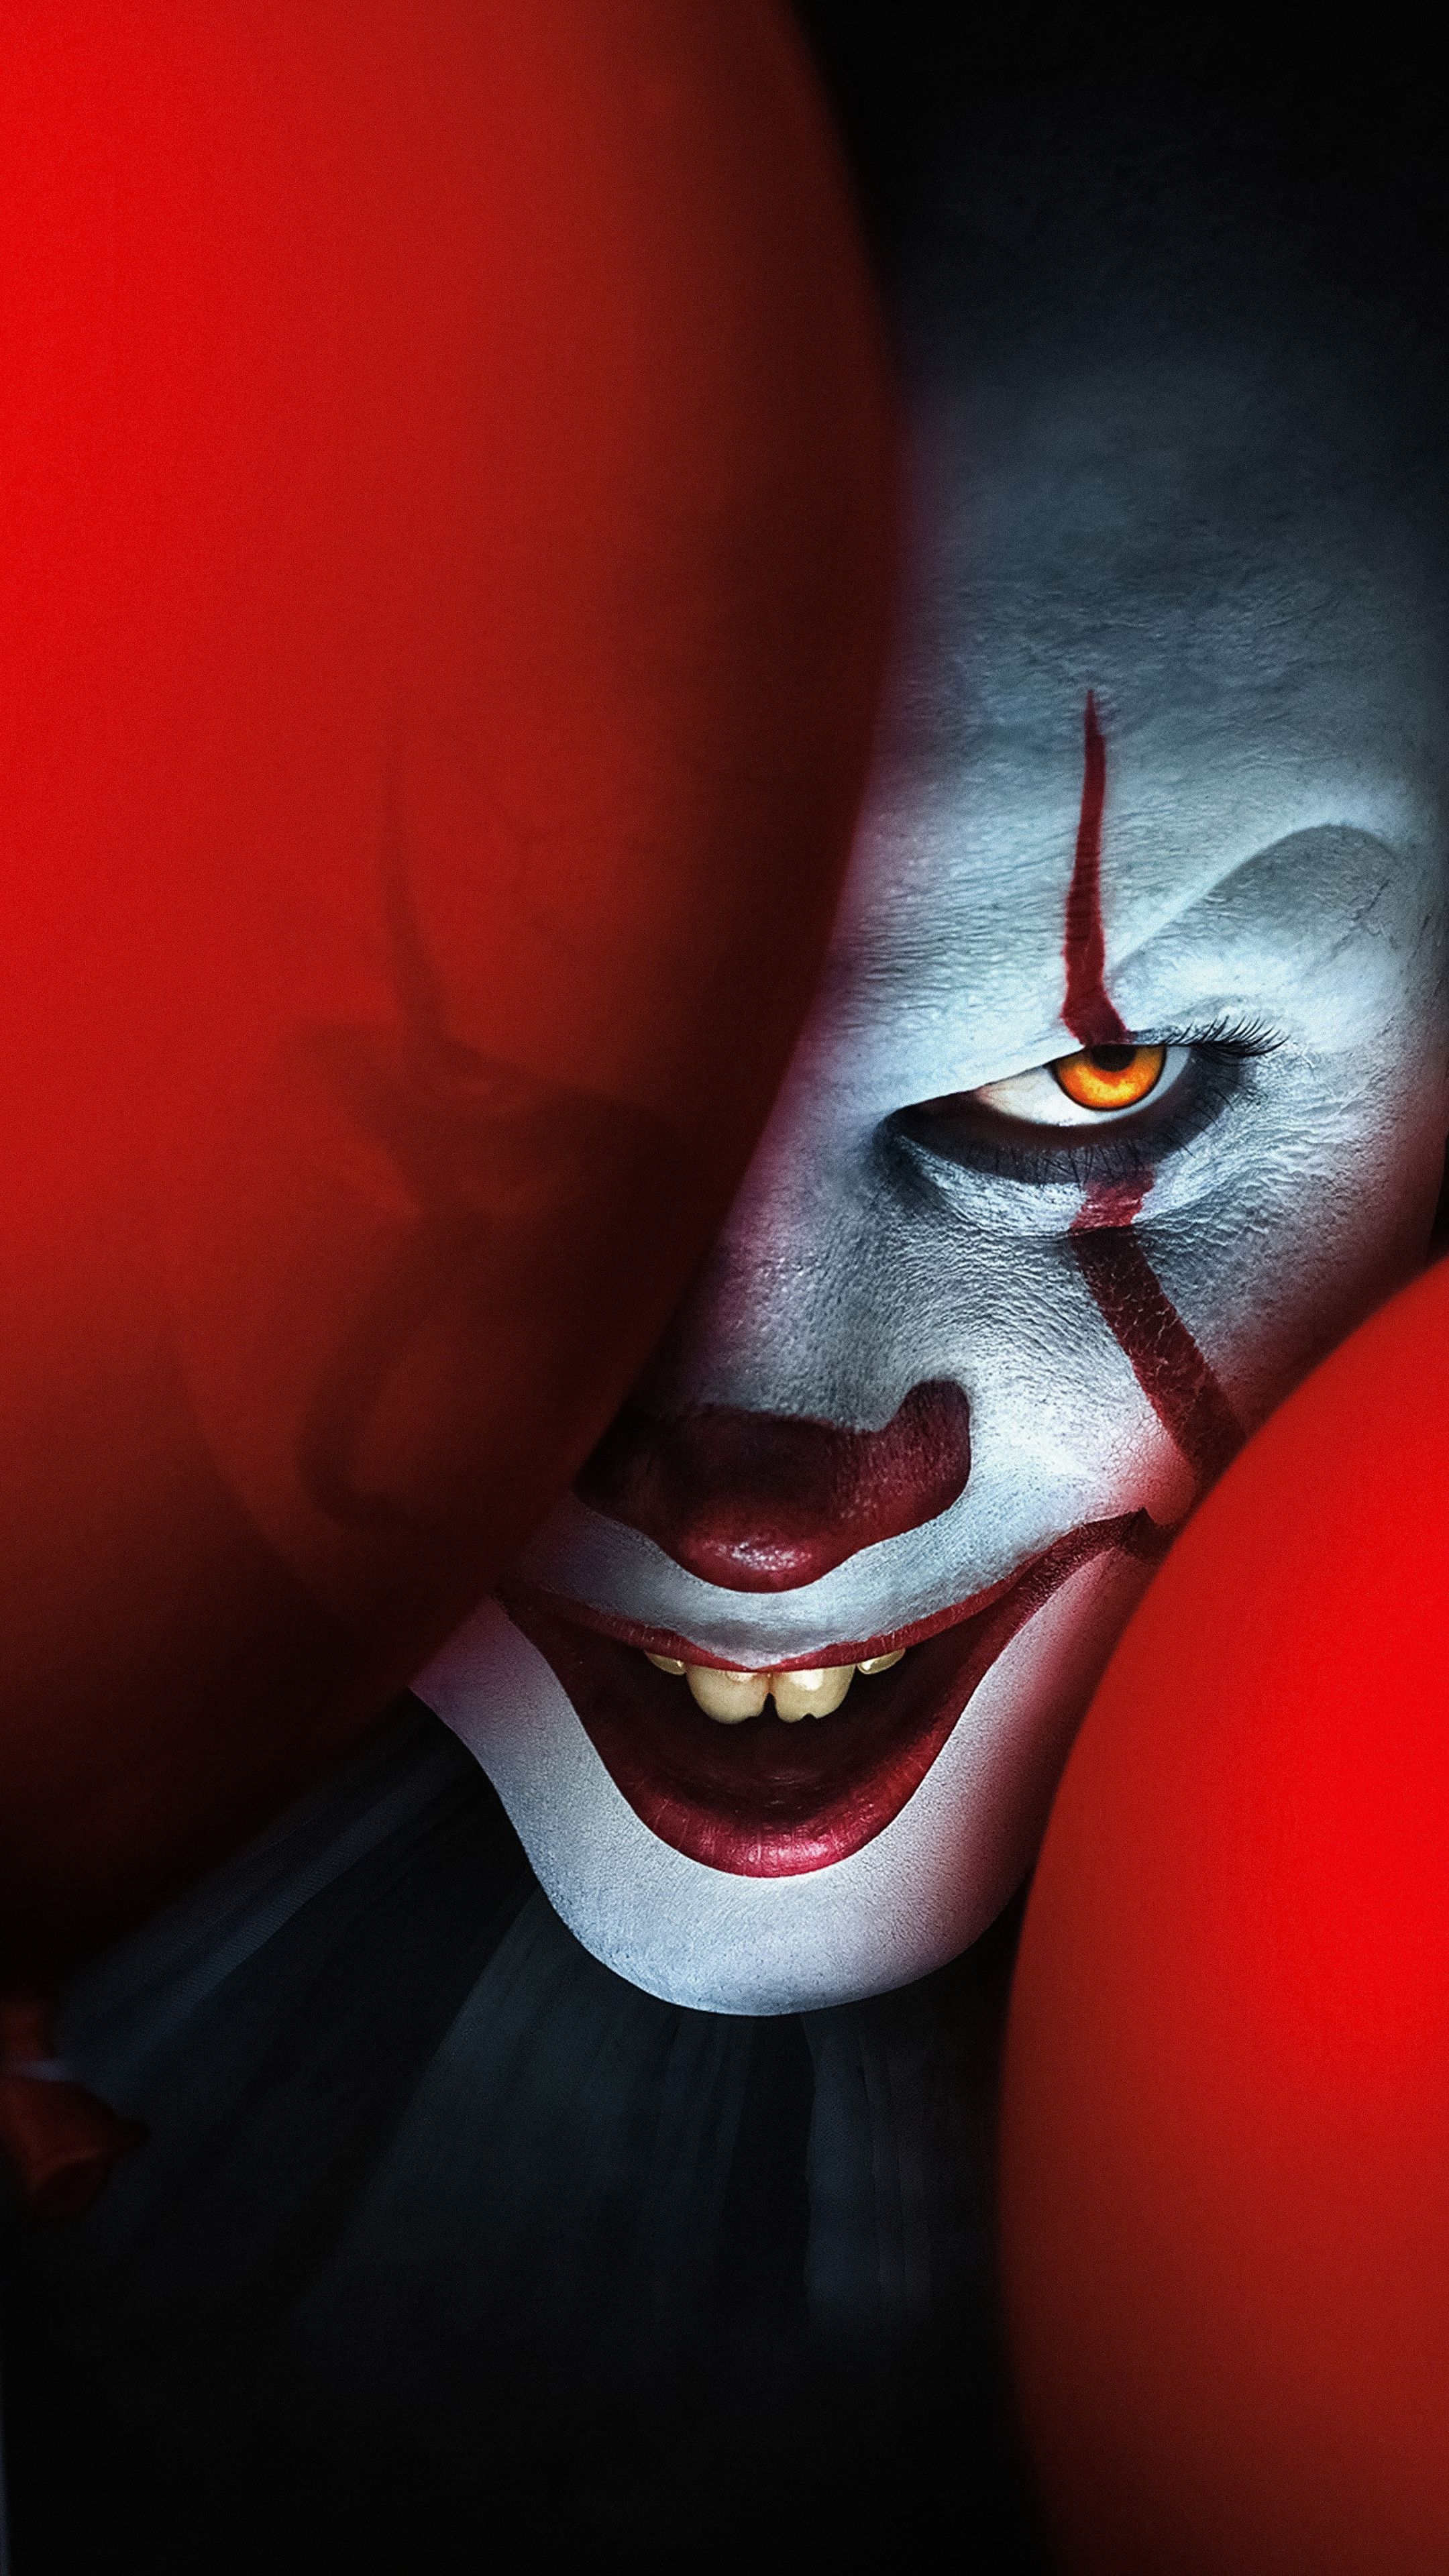 IT Chapter Two, clown, 2019 movie, creepy face wallpaper. Joker HD wallpaper, Pennywise the clown, Scary wallpaper